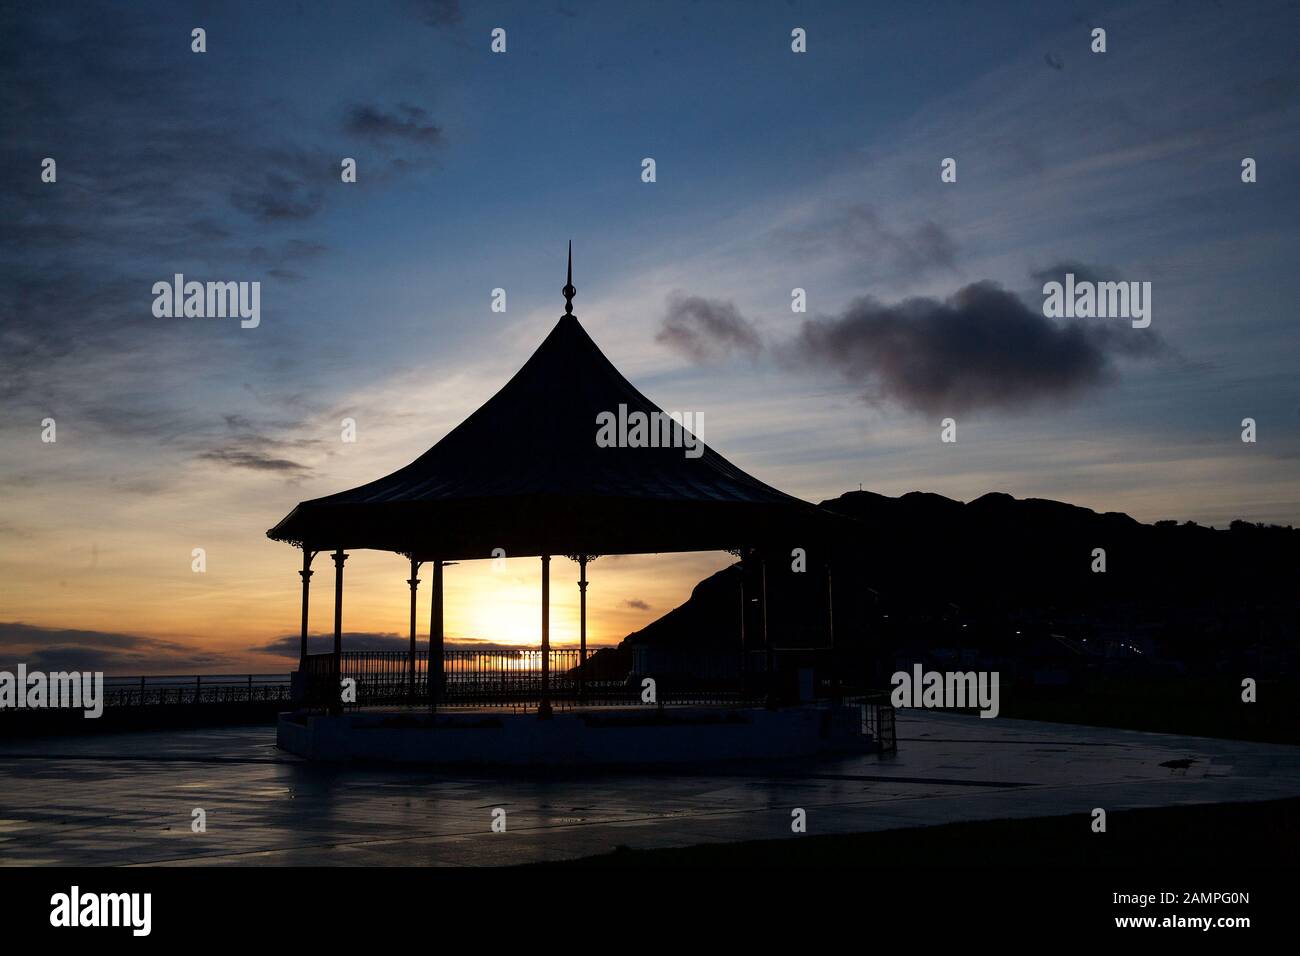 Silhouette of a gazebo on the waterfront in Bray, County Wicklow, Ireland at sunset. Stock Photo